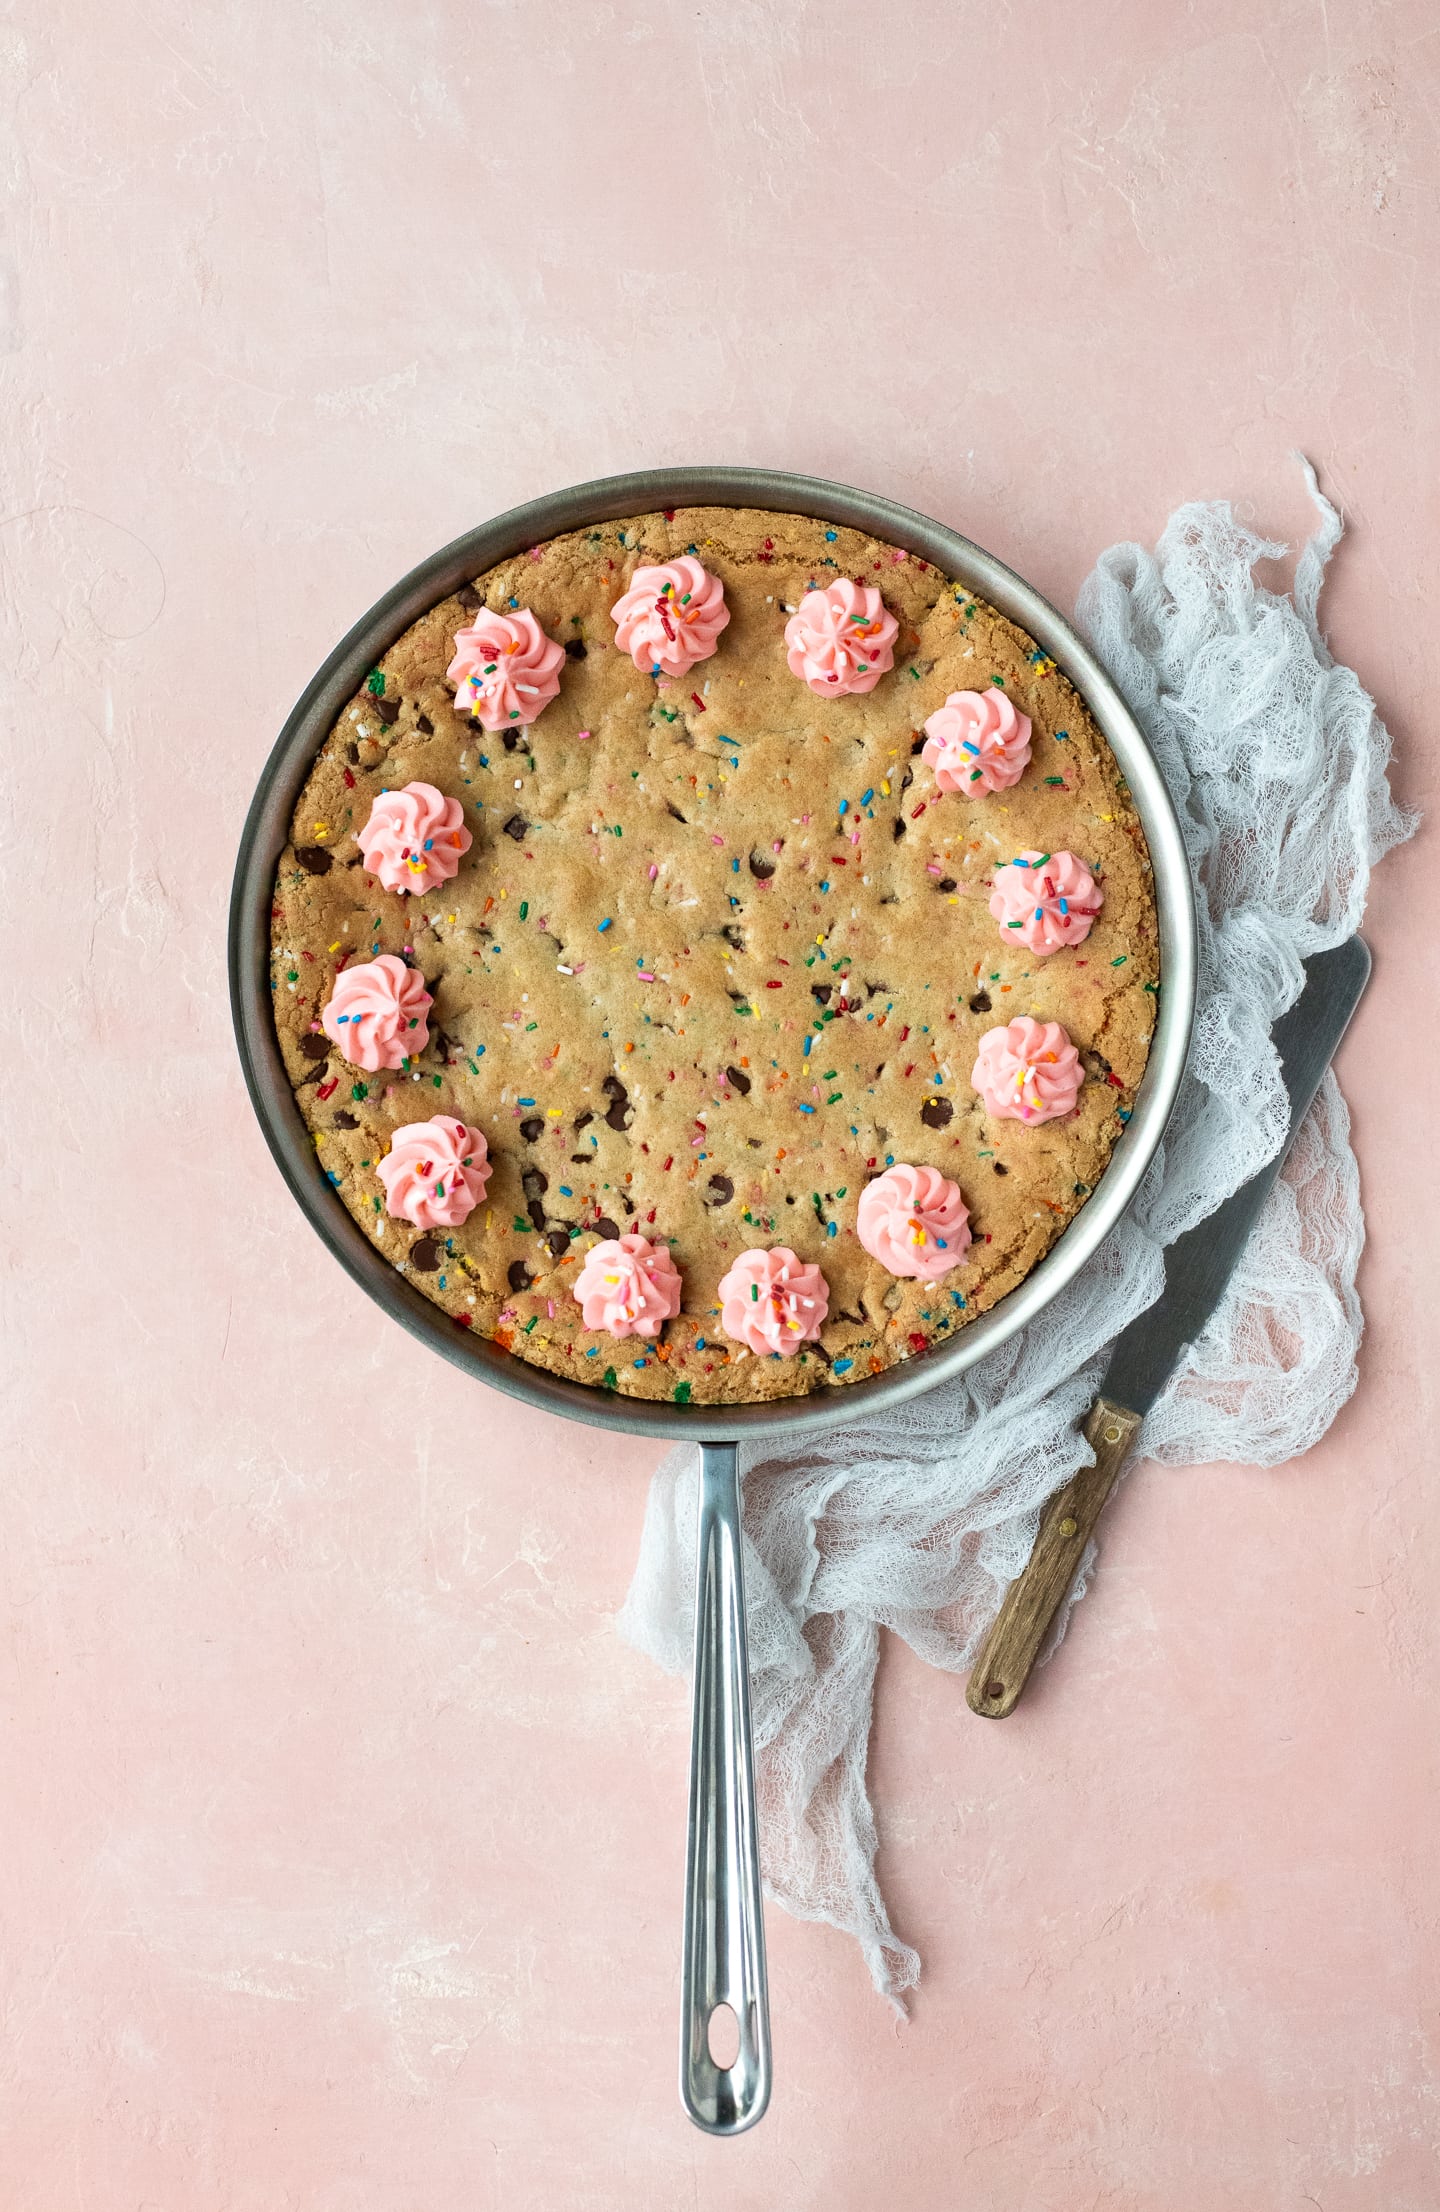 Overhead view of a chocolate chip cookie cake baked in a skillet, with a linen and serving spatula to the side.